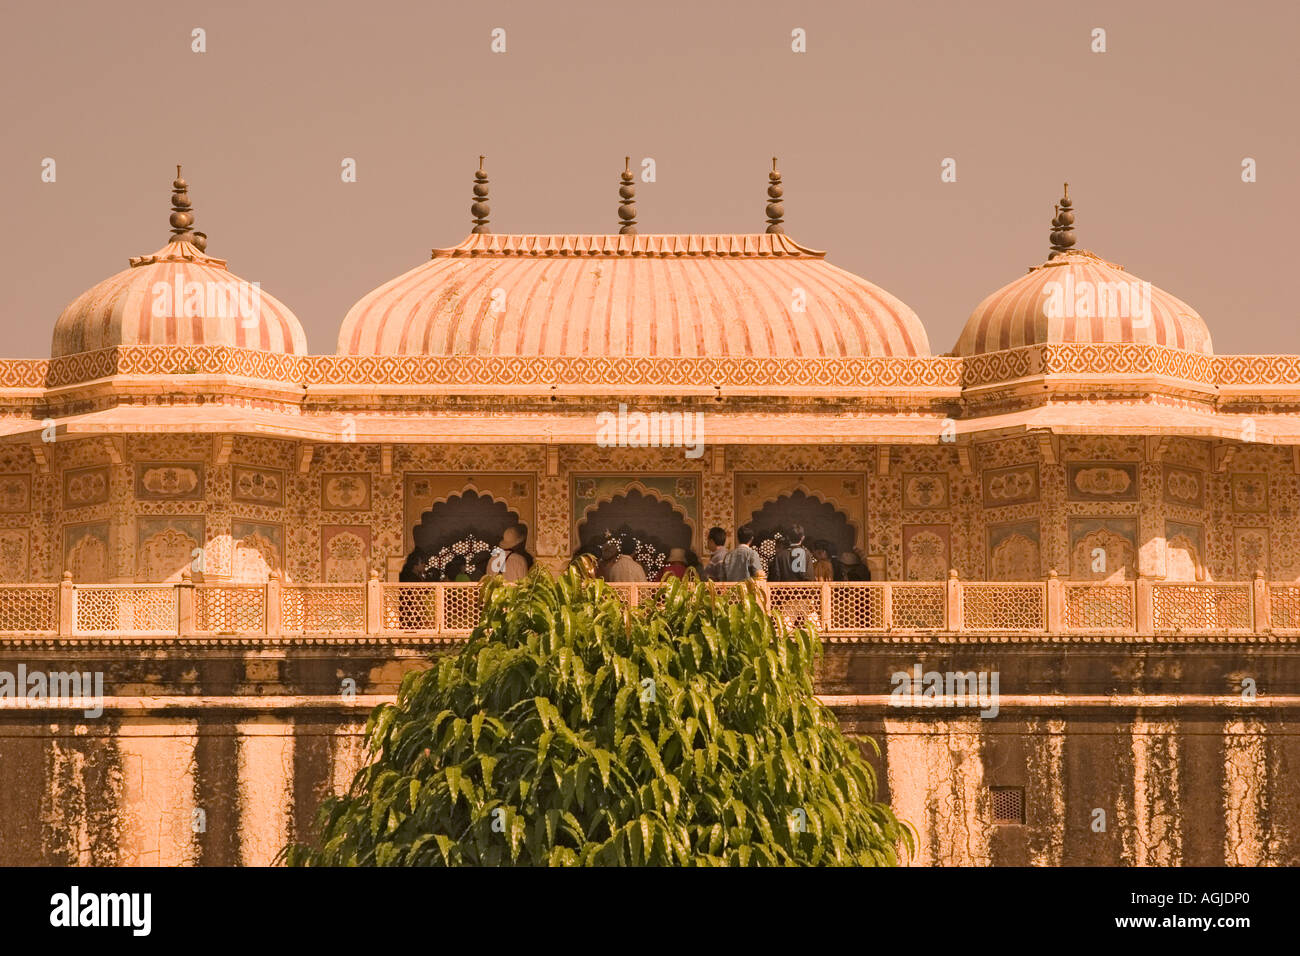 asia india view on fort amber near jaipur rajasthan Stock Photo